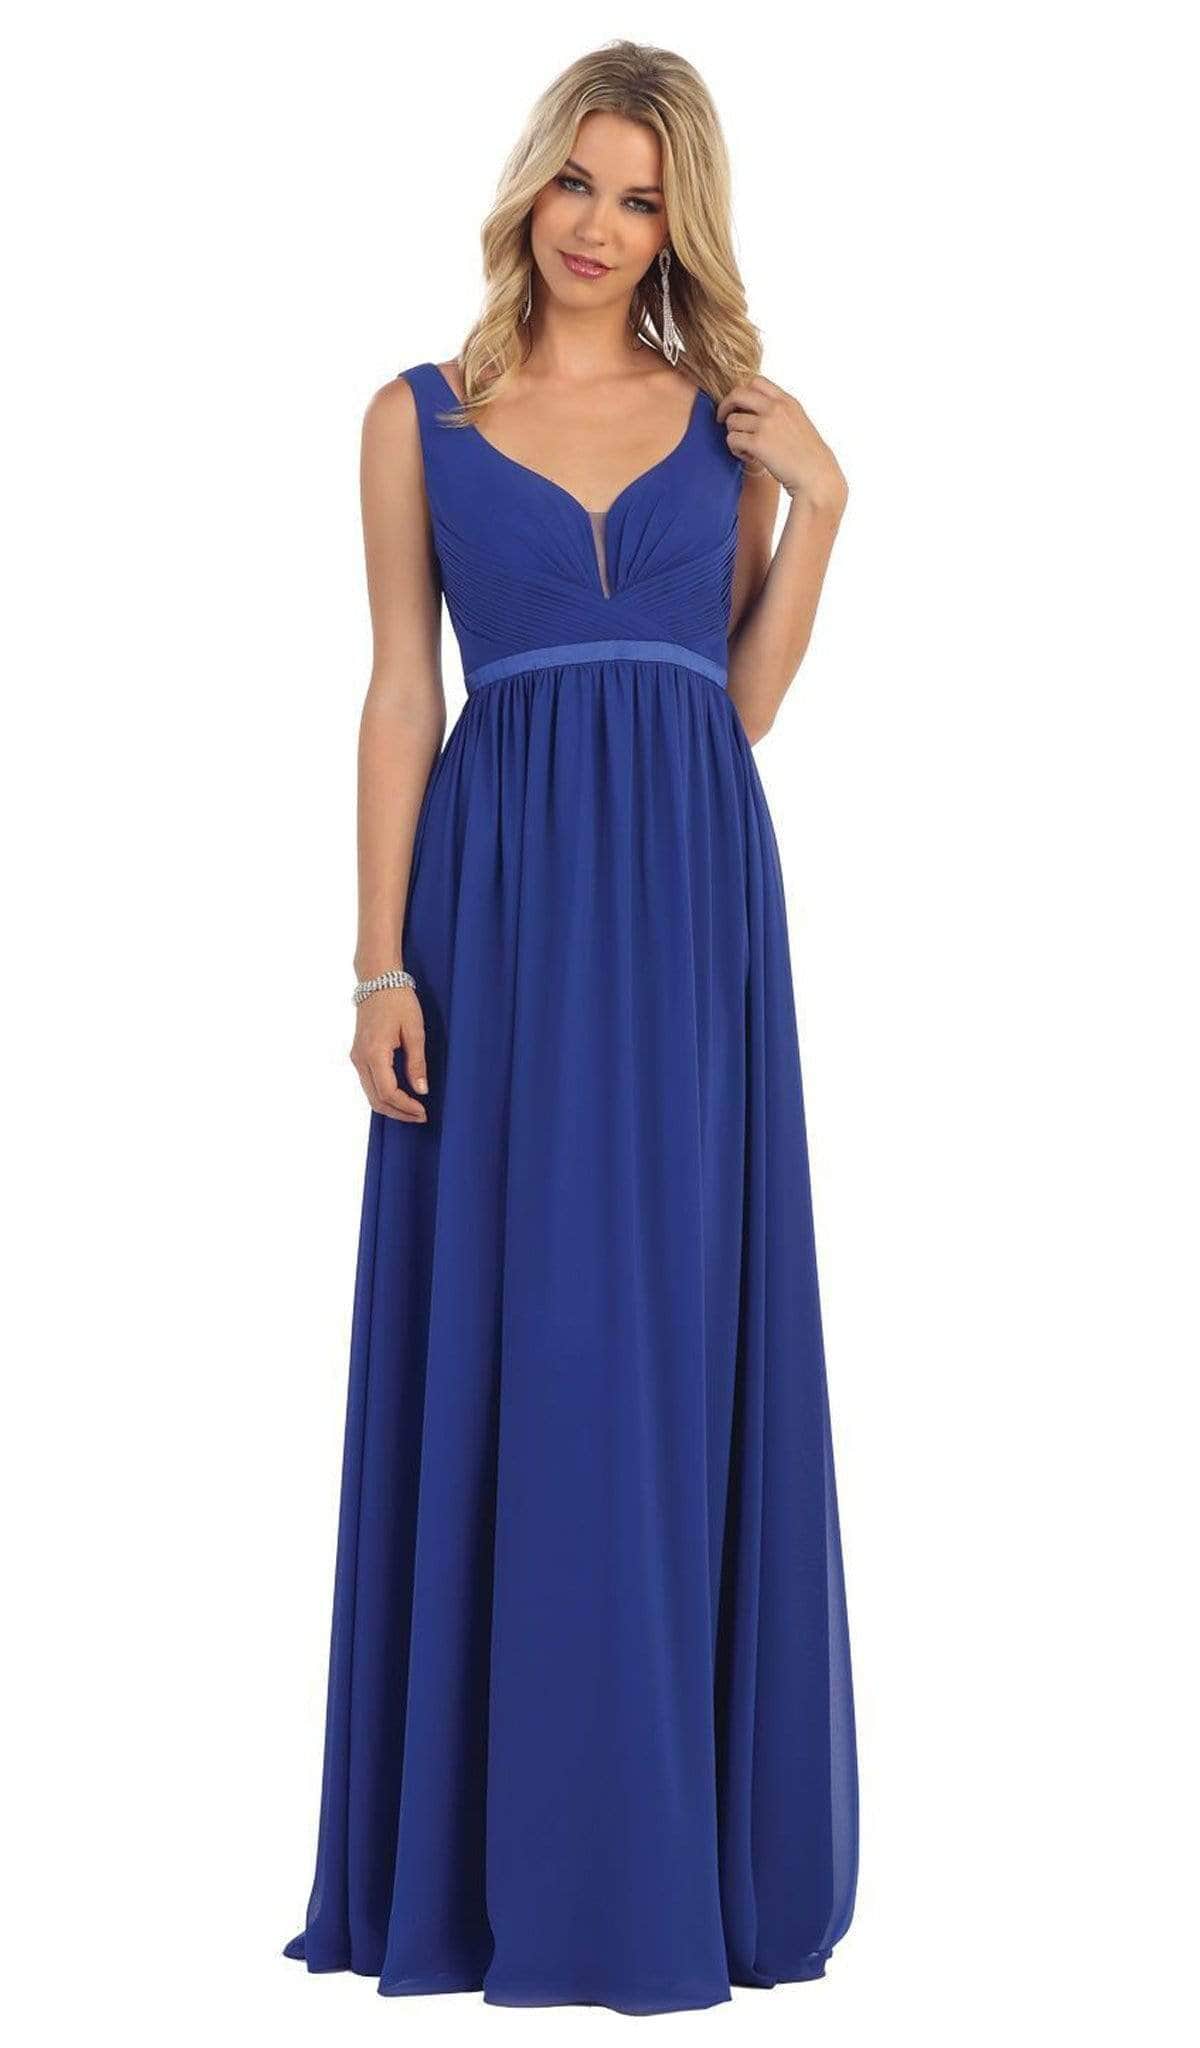 May Queen - MQ1225 Sleeveless Sheer Plunging A-Line Gown